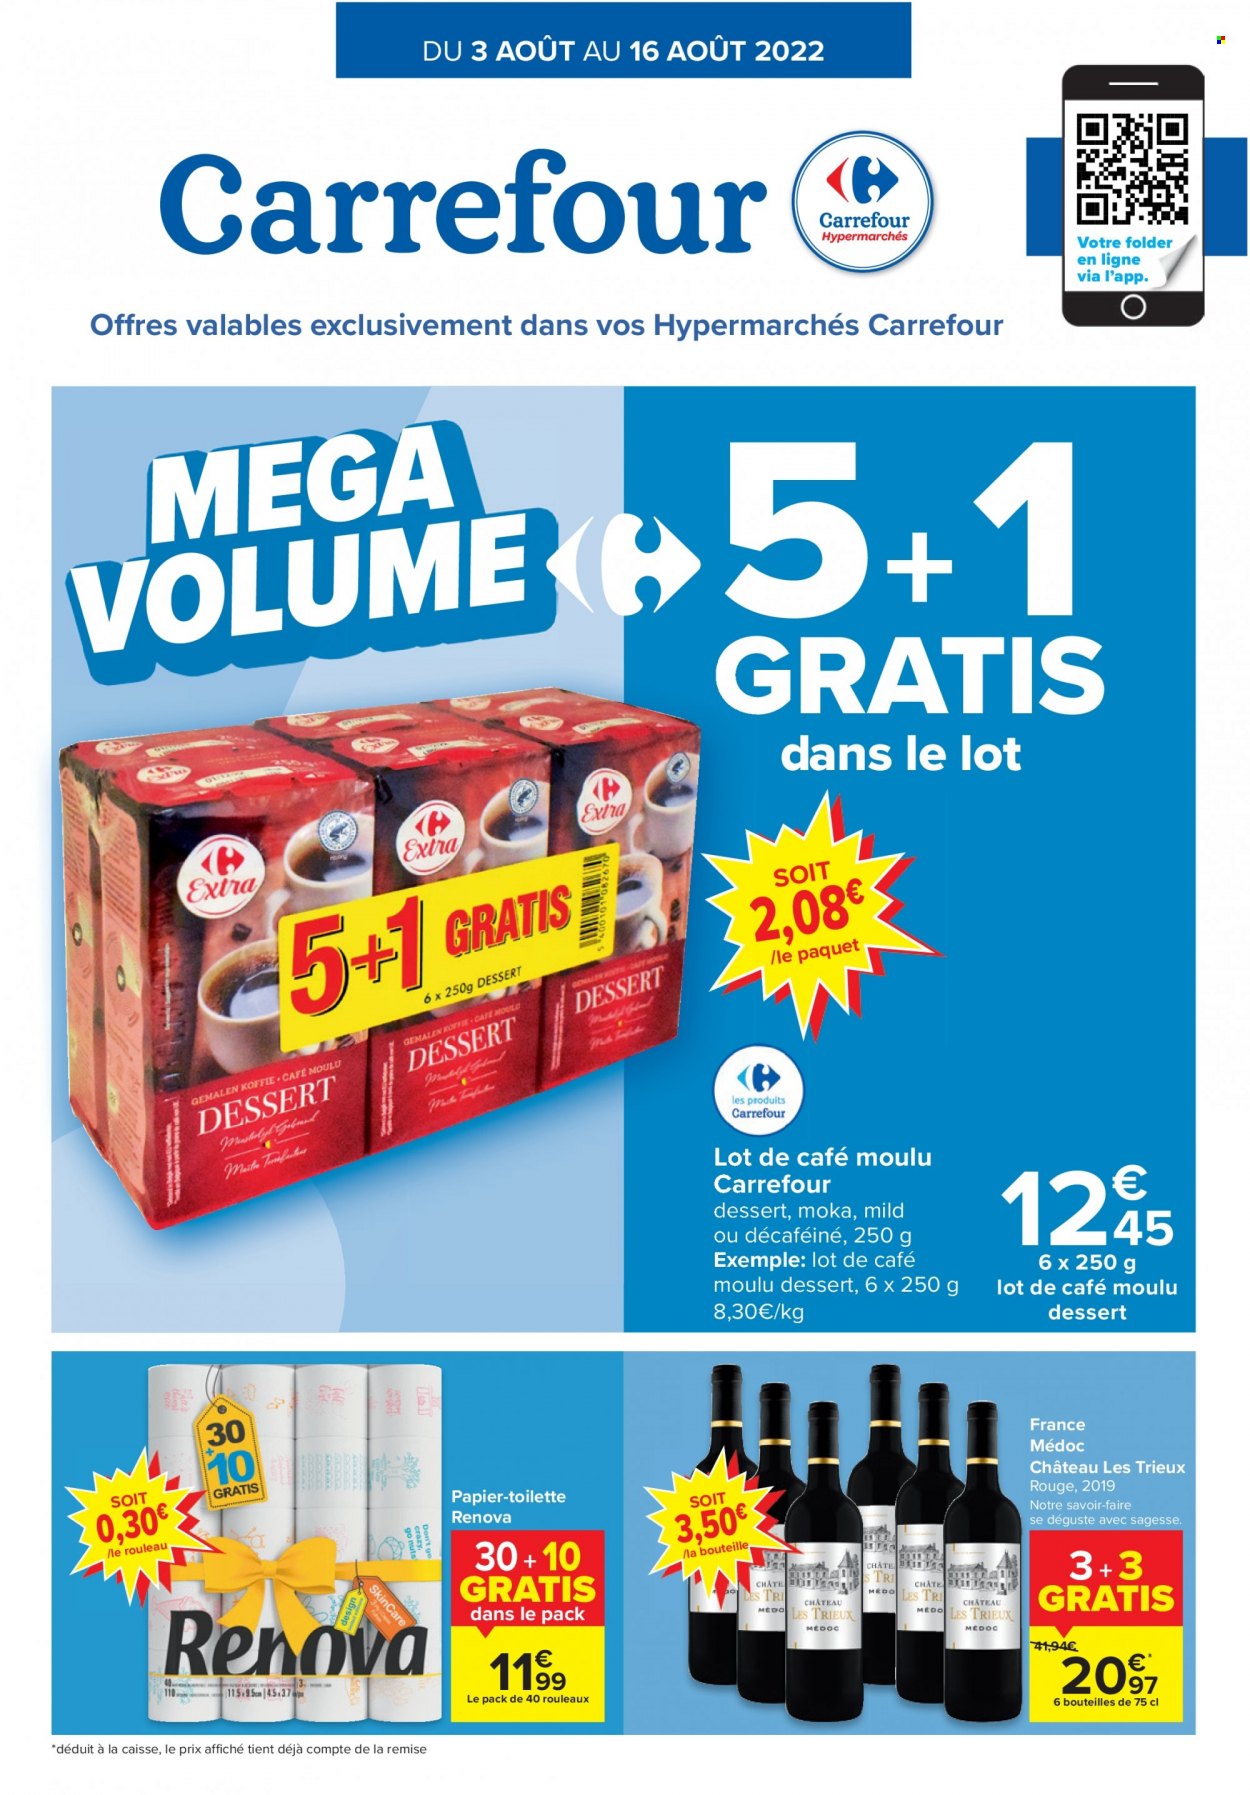 Catalogue Carrefour hypermarkt - 3.8.2022 - 16.8.2022. Page 1.